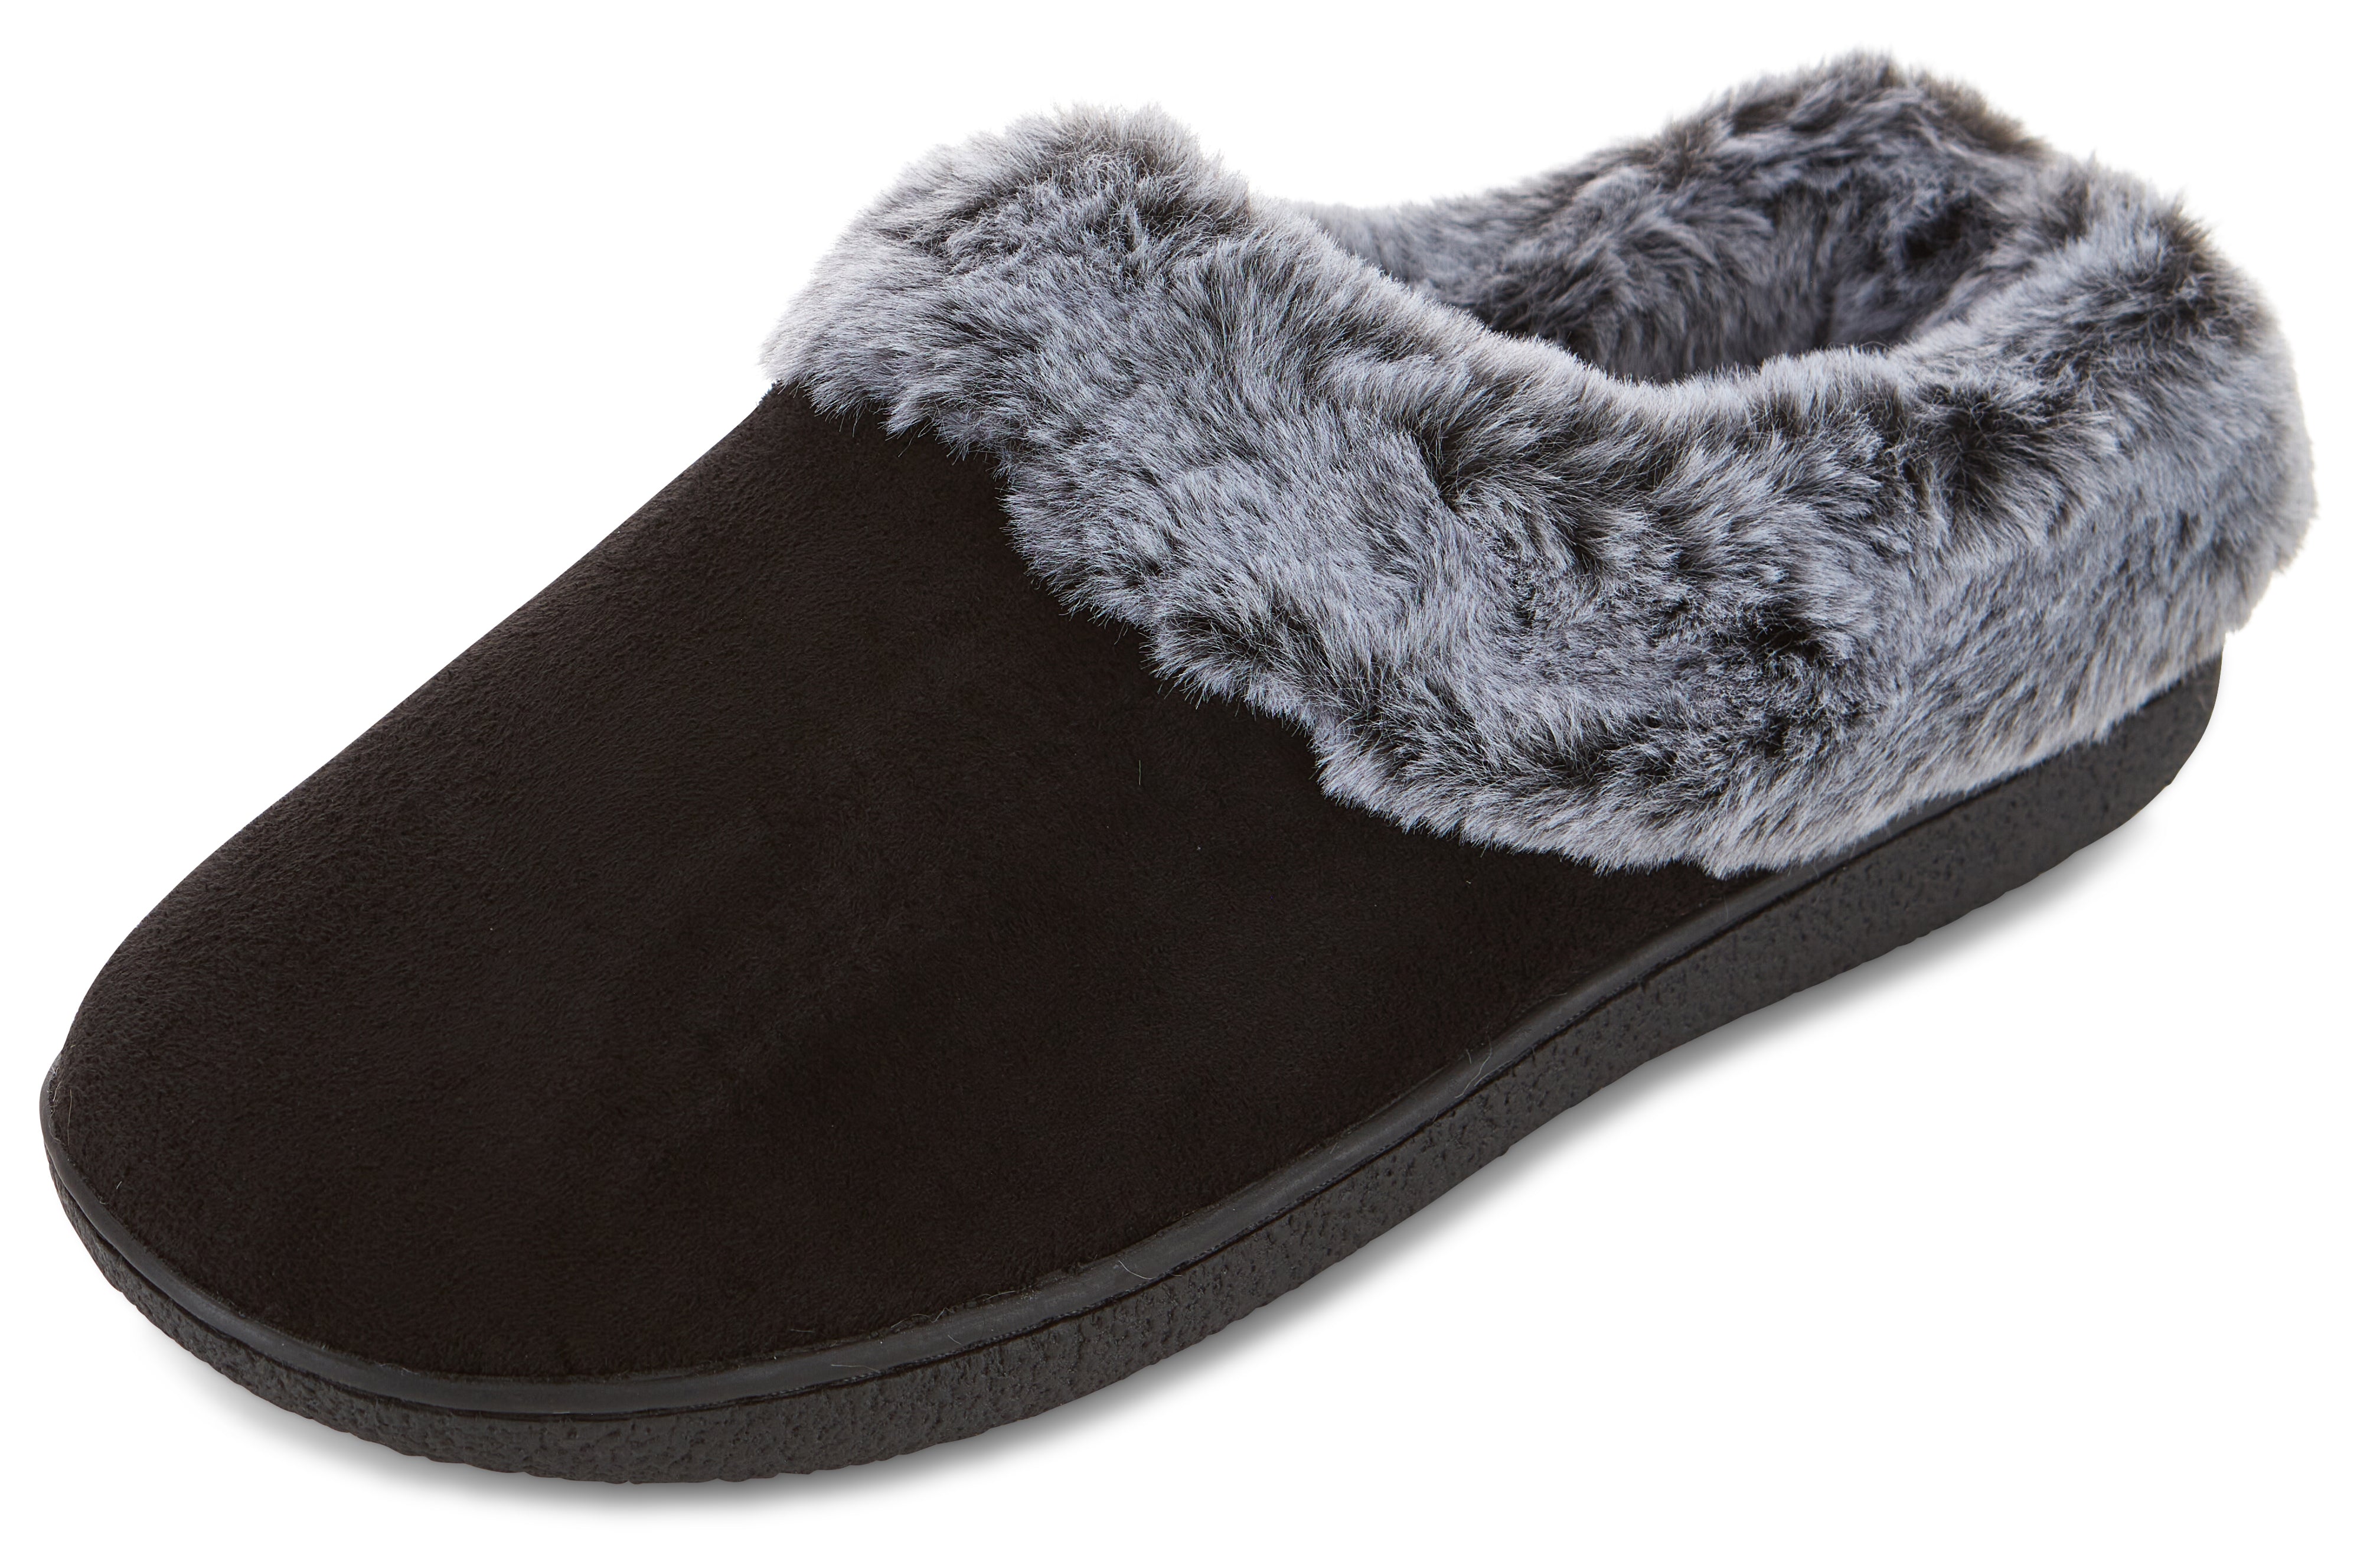 Womens Soft Classic Indoor/Outdoor Two-Tone Faux Fur Clog Slipper - Black